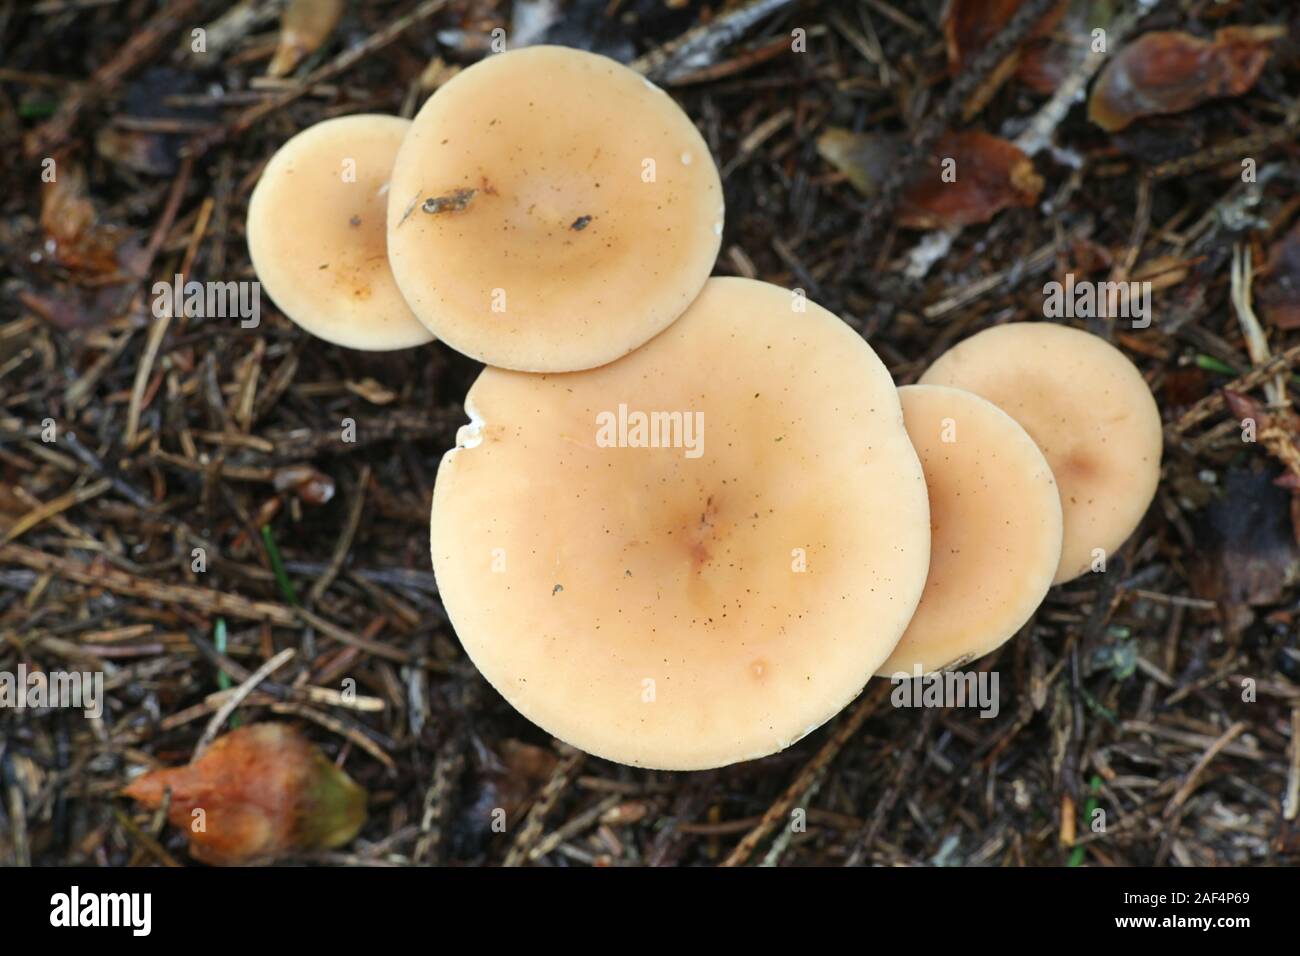 Paralepista flaccida (also called Clitocybe flaccida, Clitocybe inversa, Lepista flaccida and Lepista inversa), the tawny funnel cap, mushroom from Fi Stock Photo